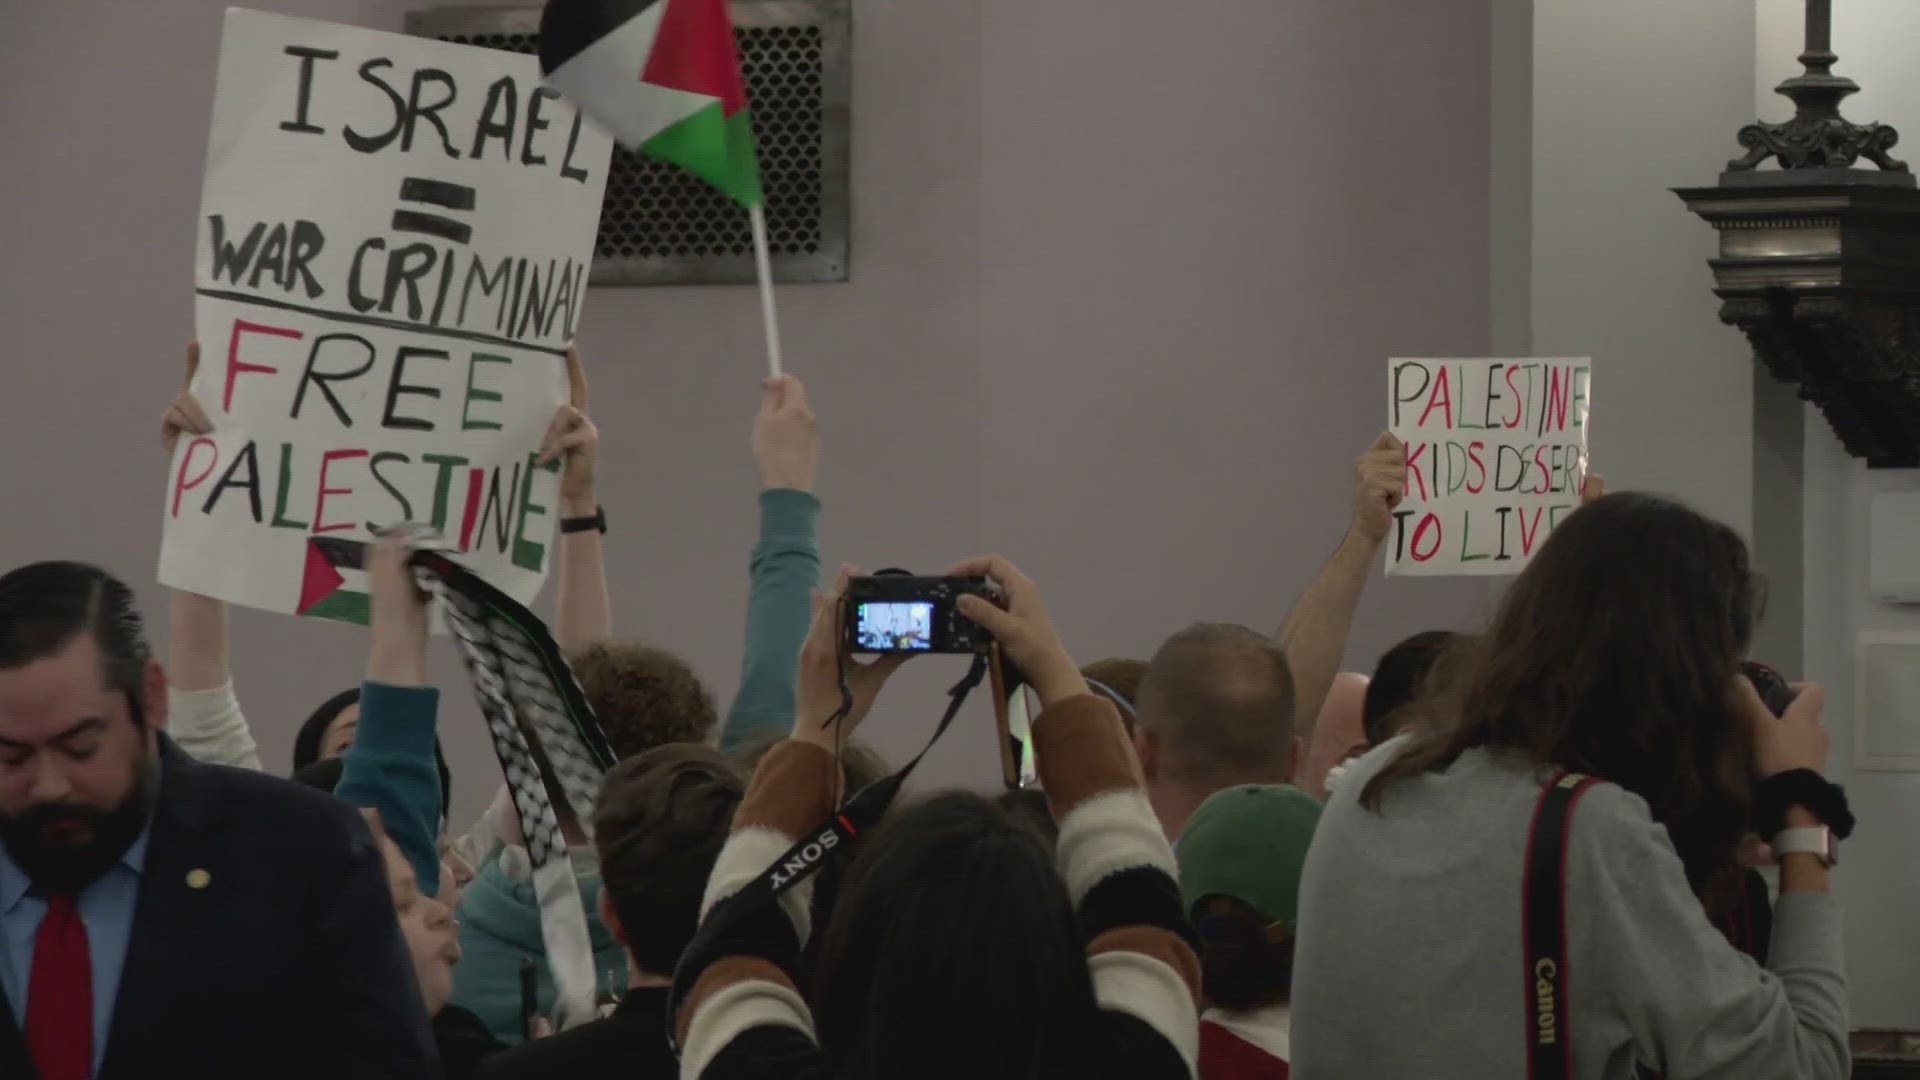 Police ushered dozens of Palestinian-American protestors out of the St. Louis Board of Aldermen chambers today.